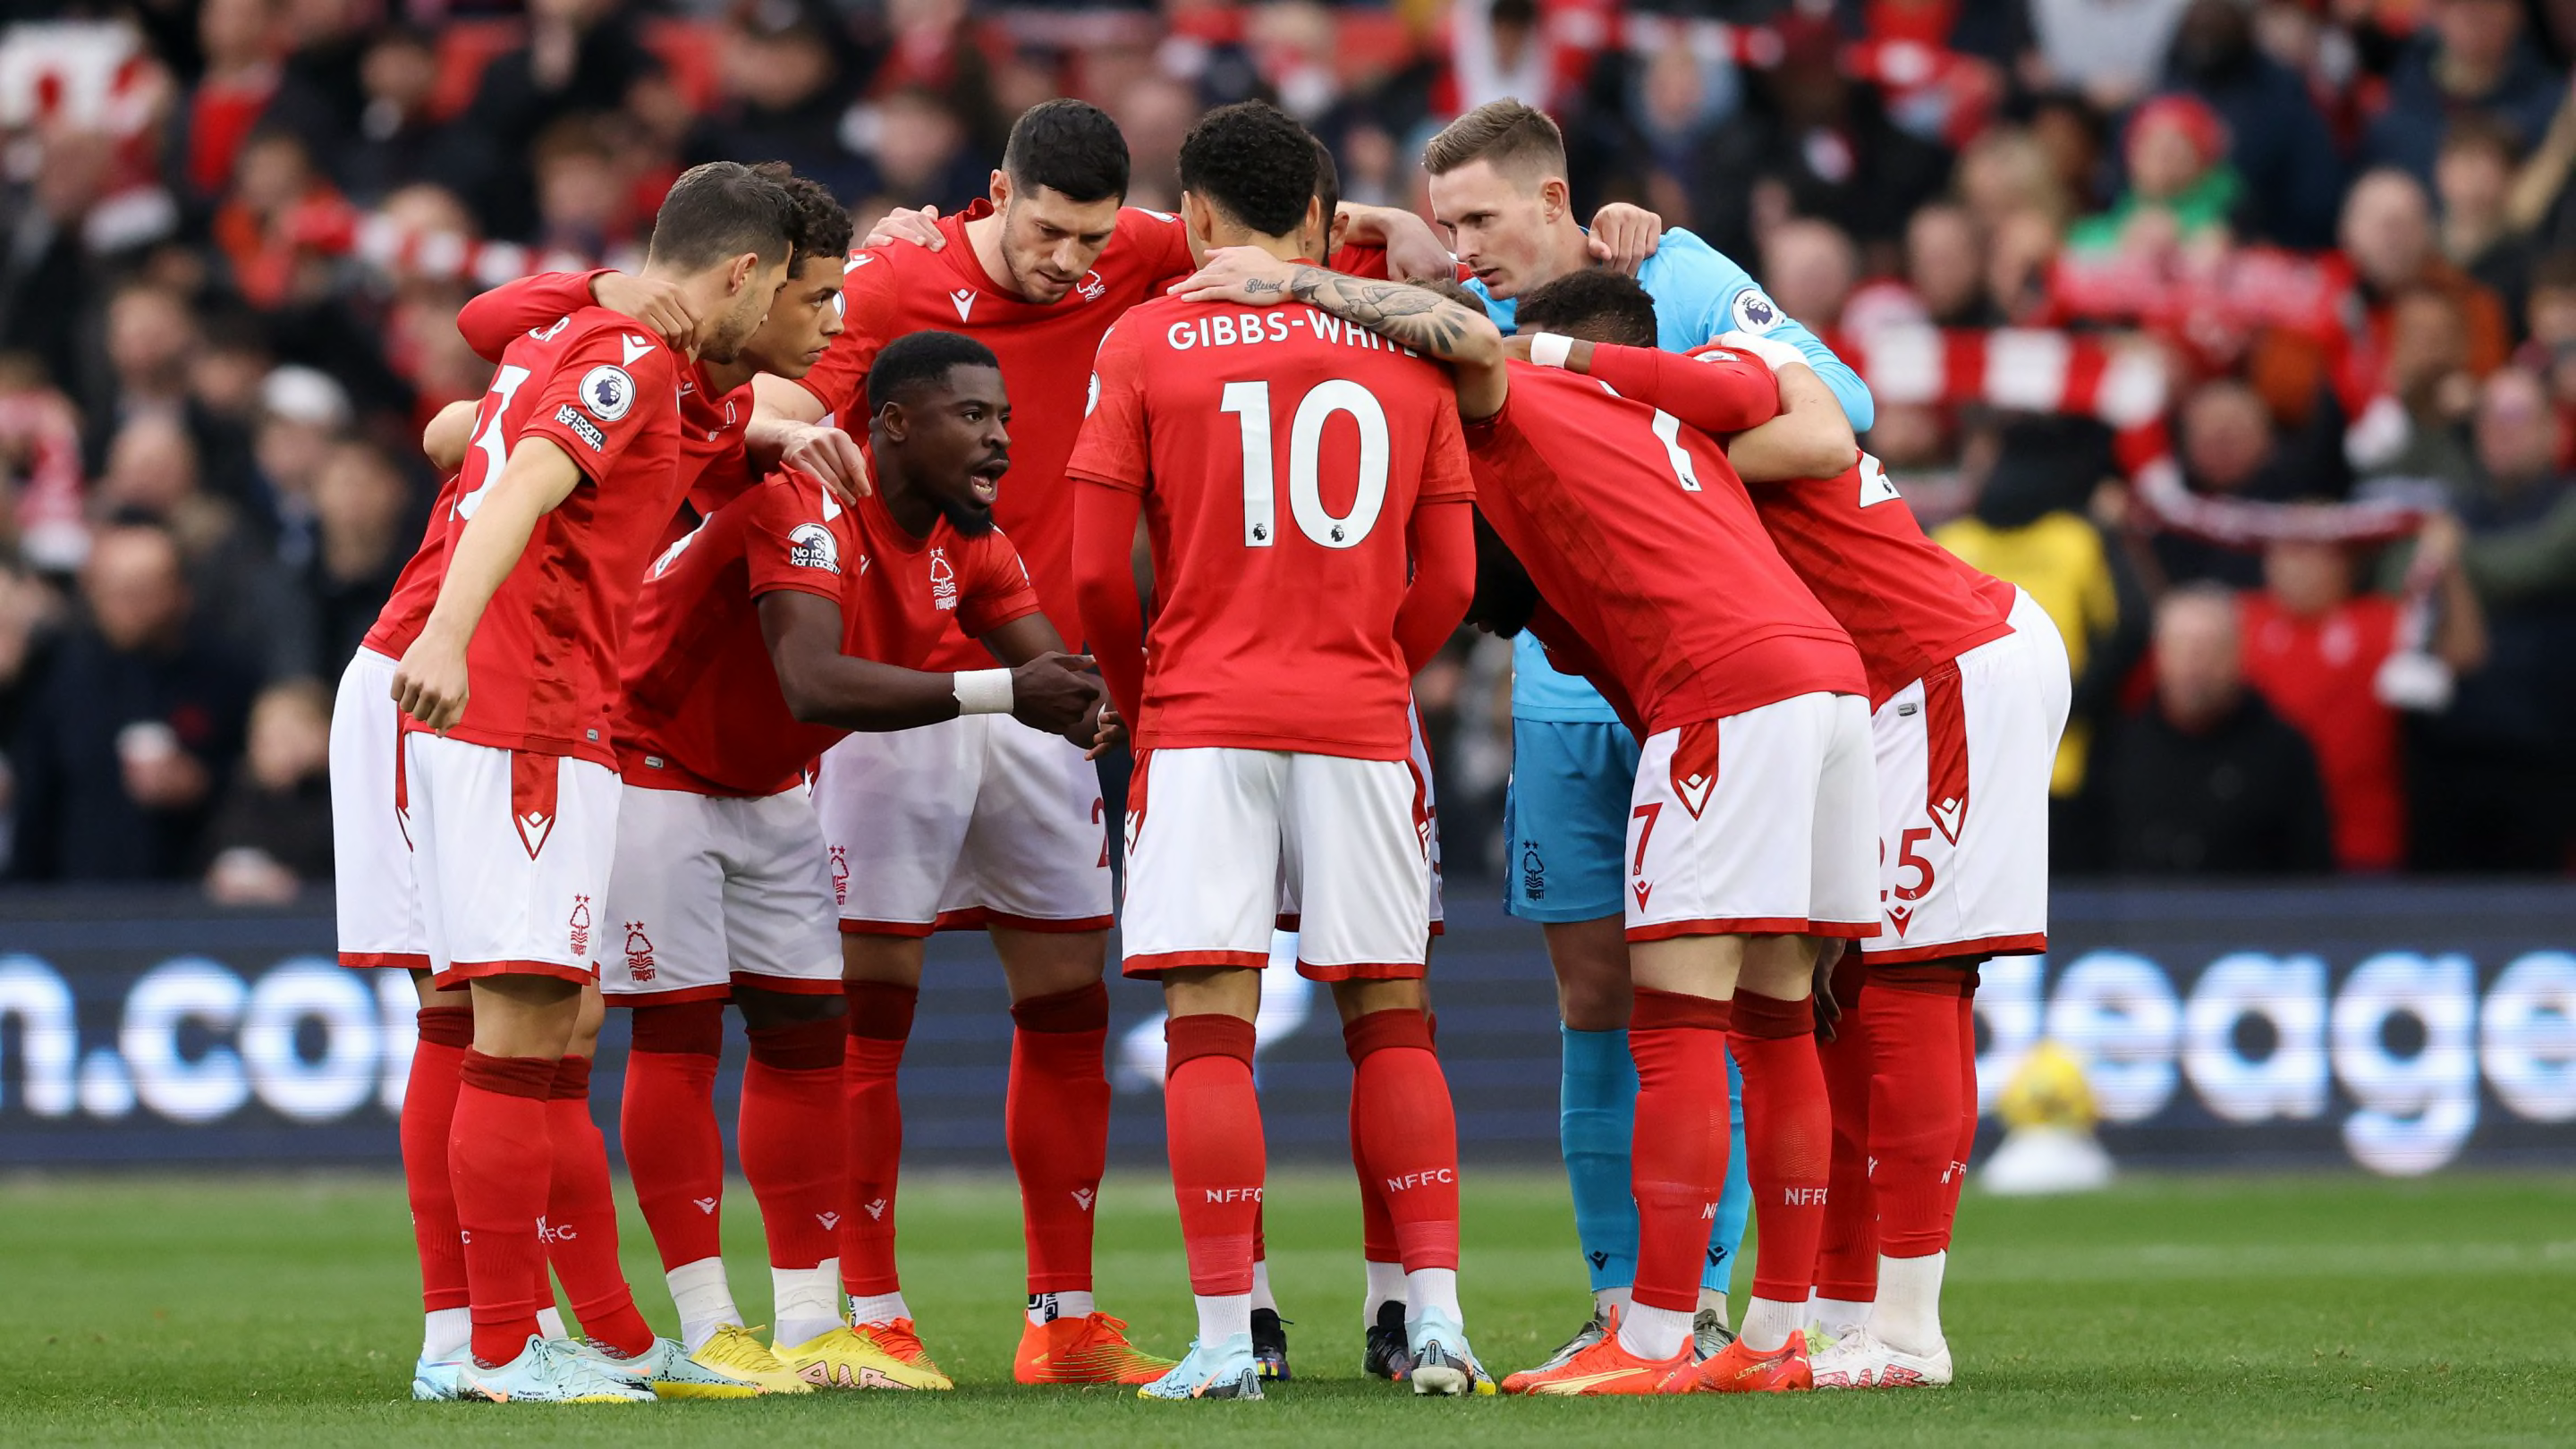 Nottingham Forest vs Crystal Palace - Premier League: How to watch on TV & live stream